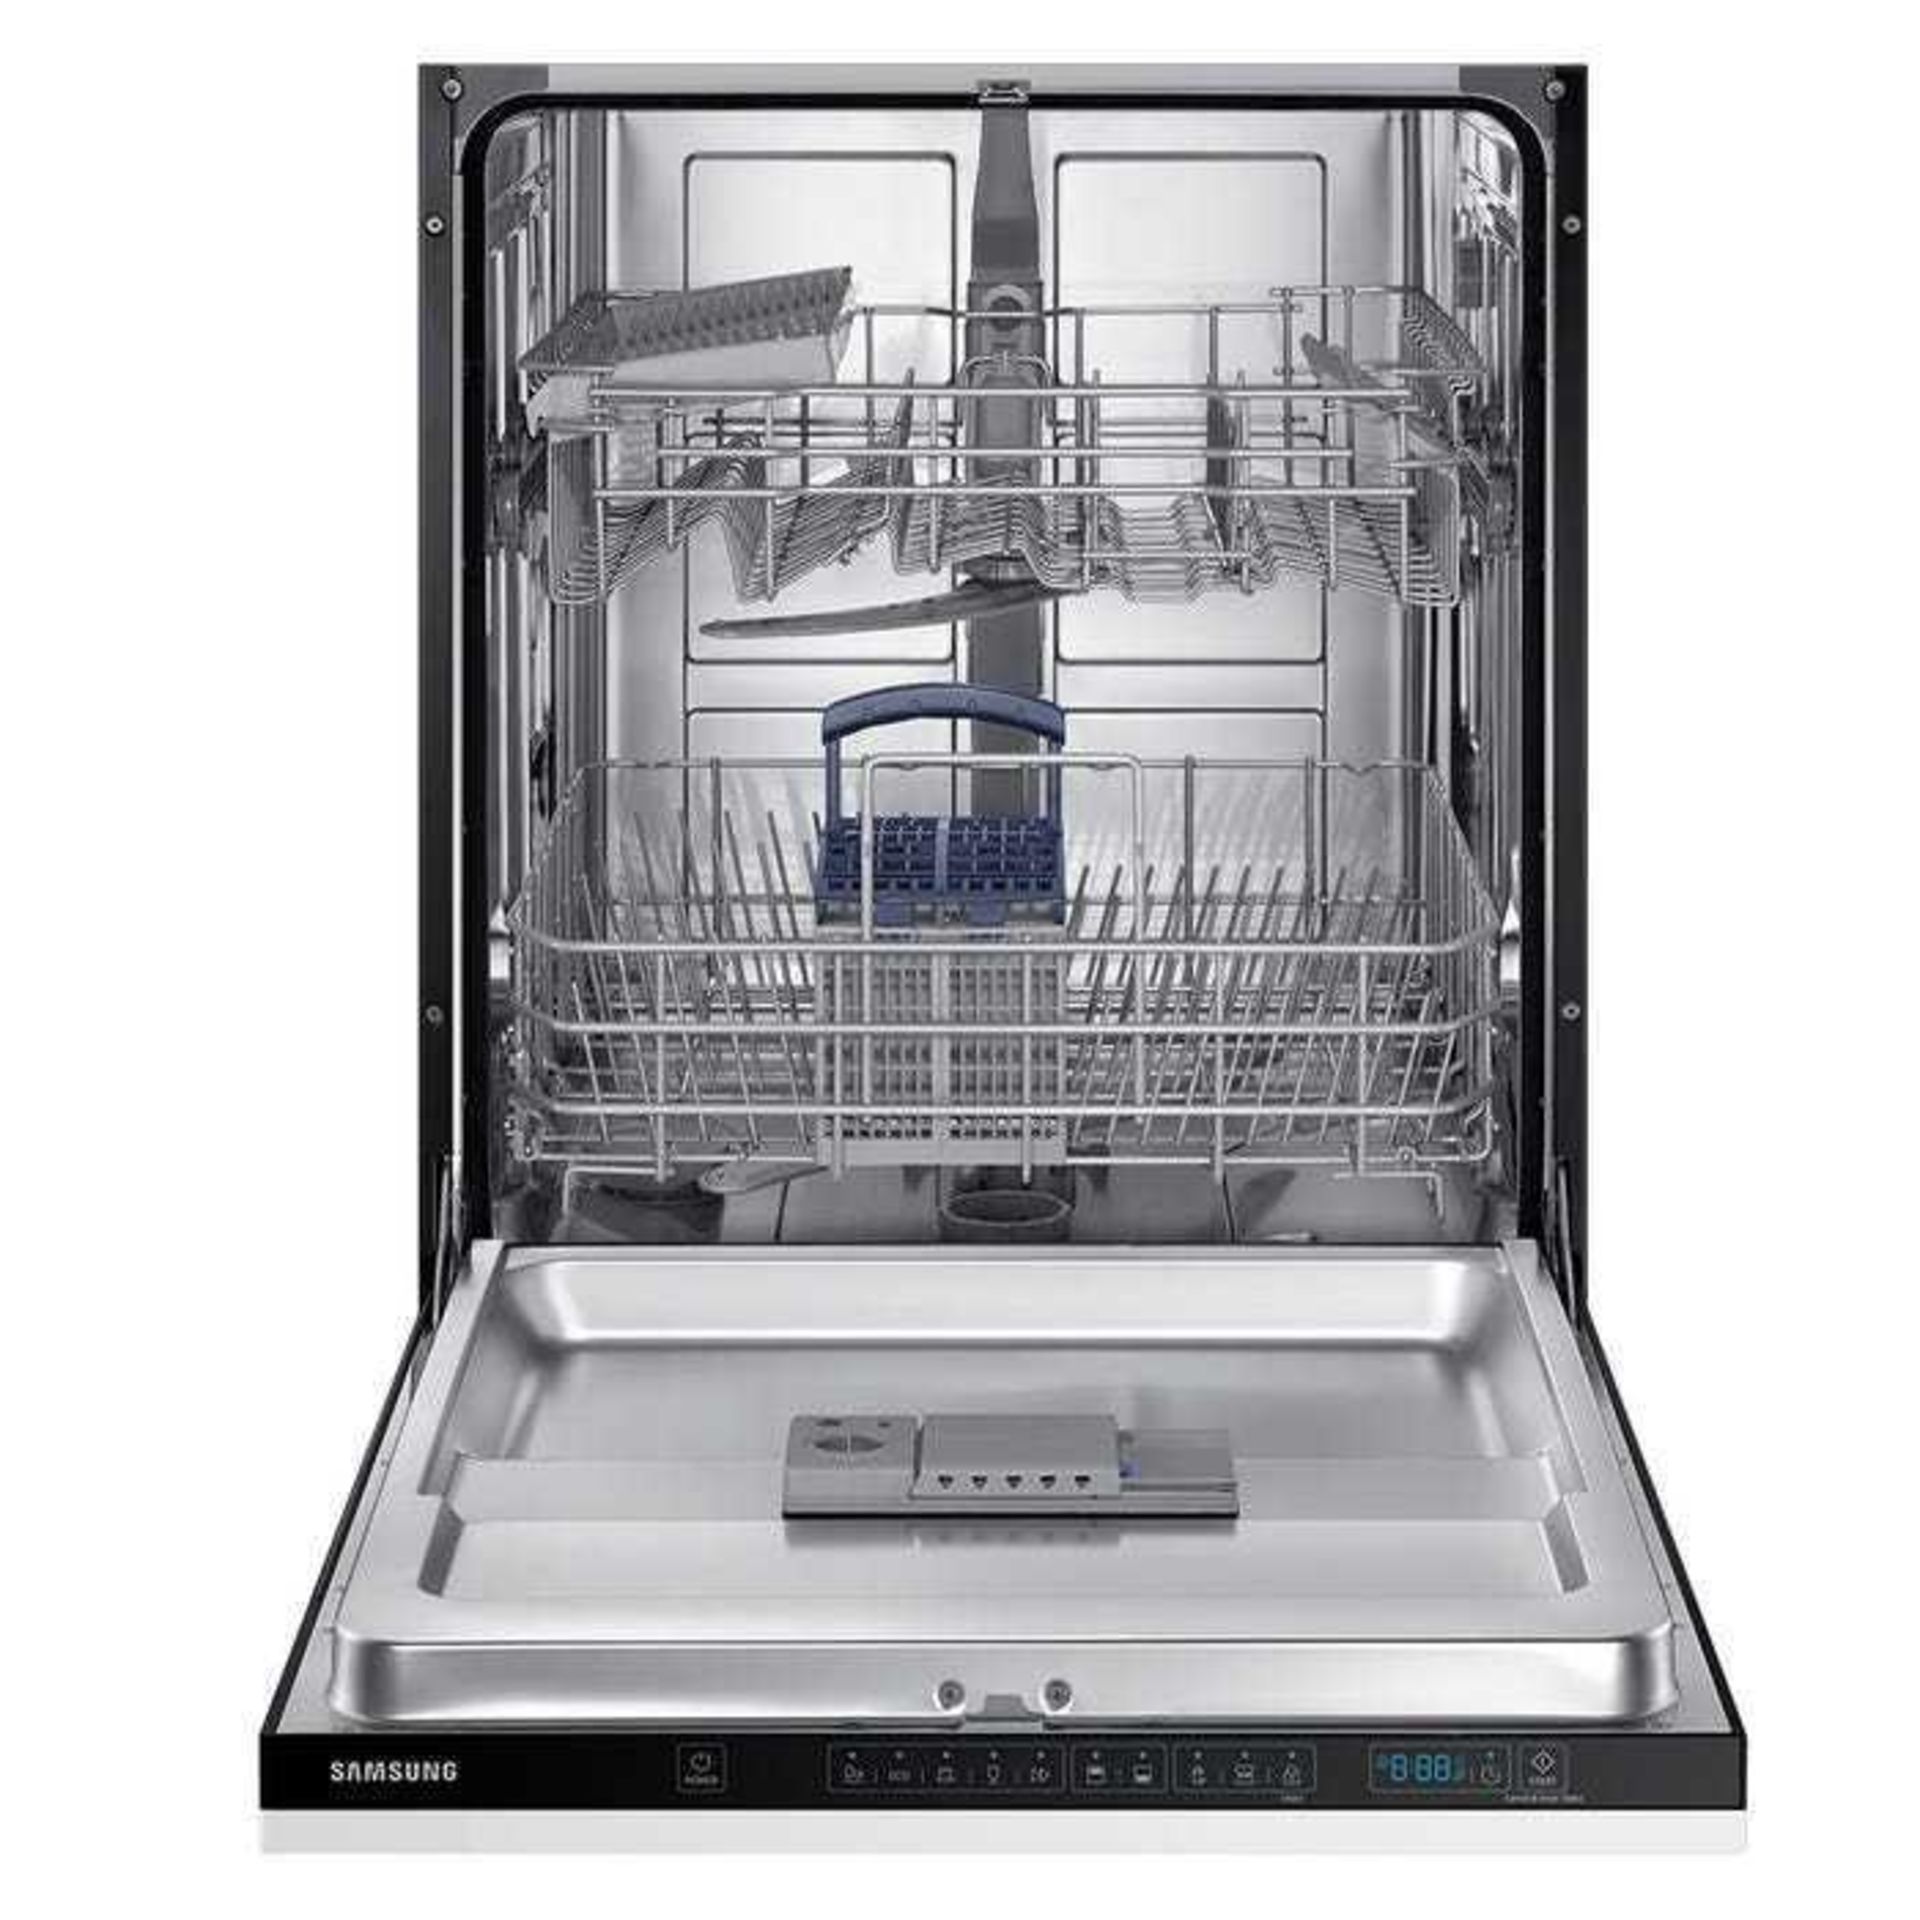 (Kw) RRP £600, Lot To Contain X1 Samsung Dishwasher, Unboxed